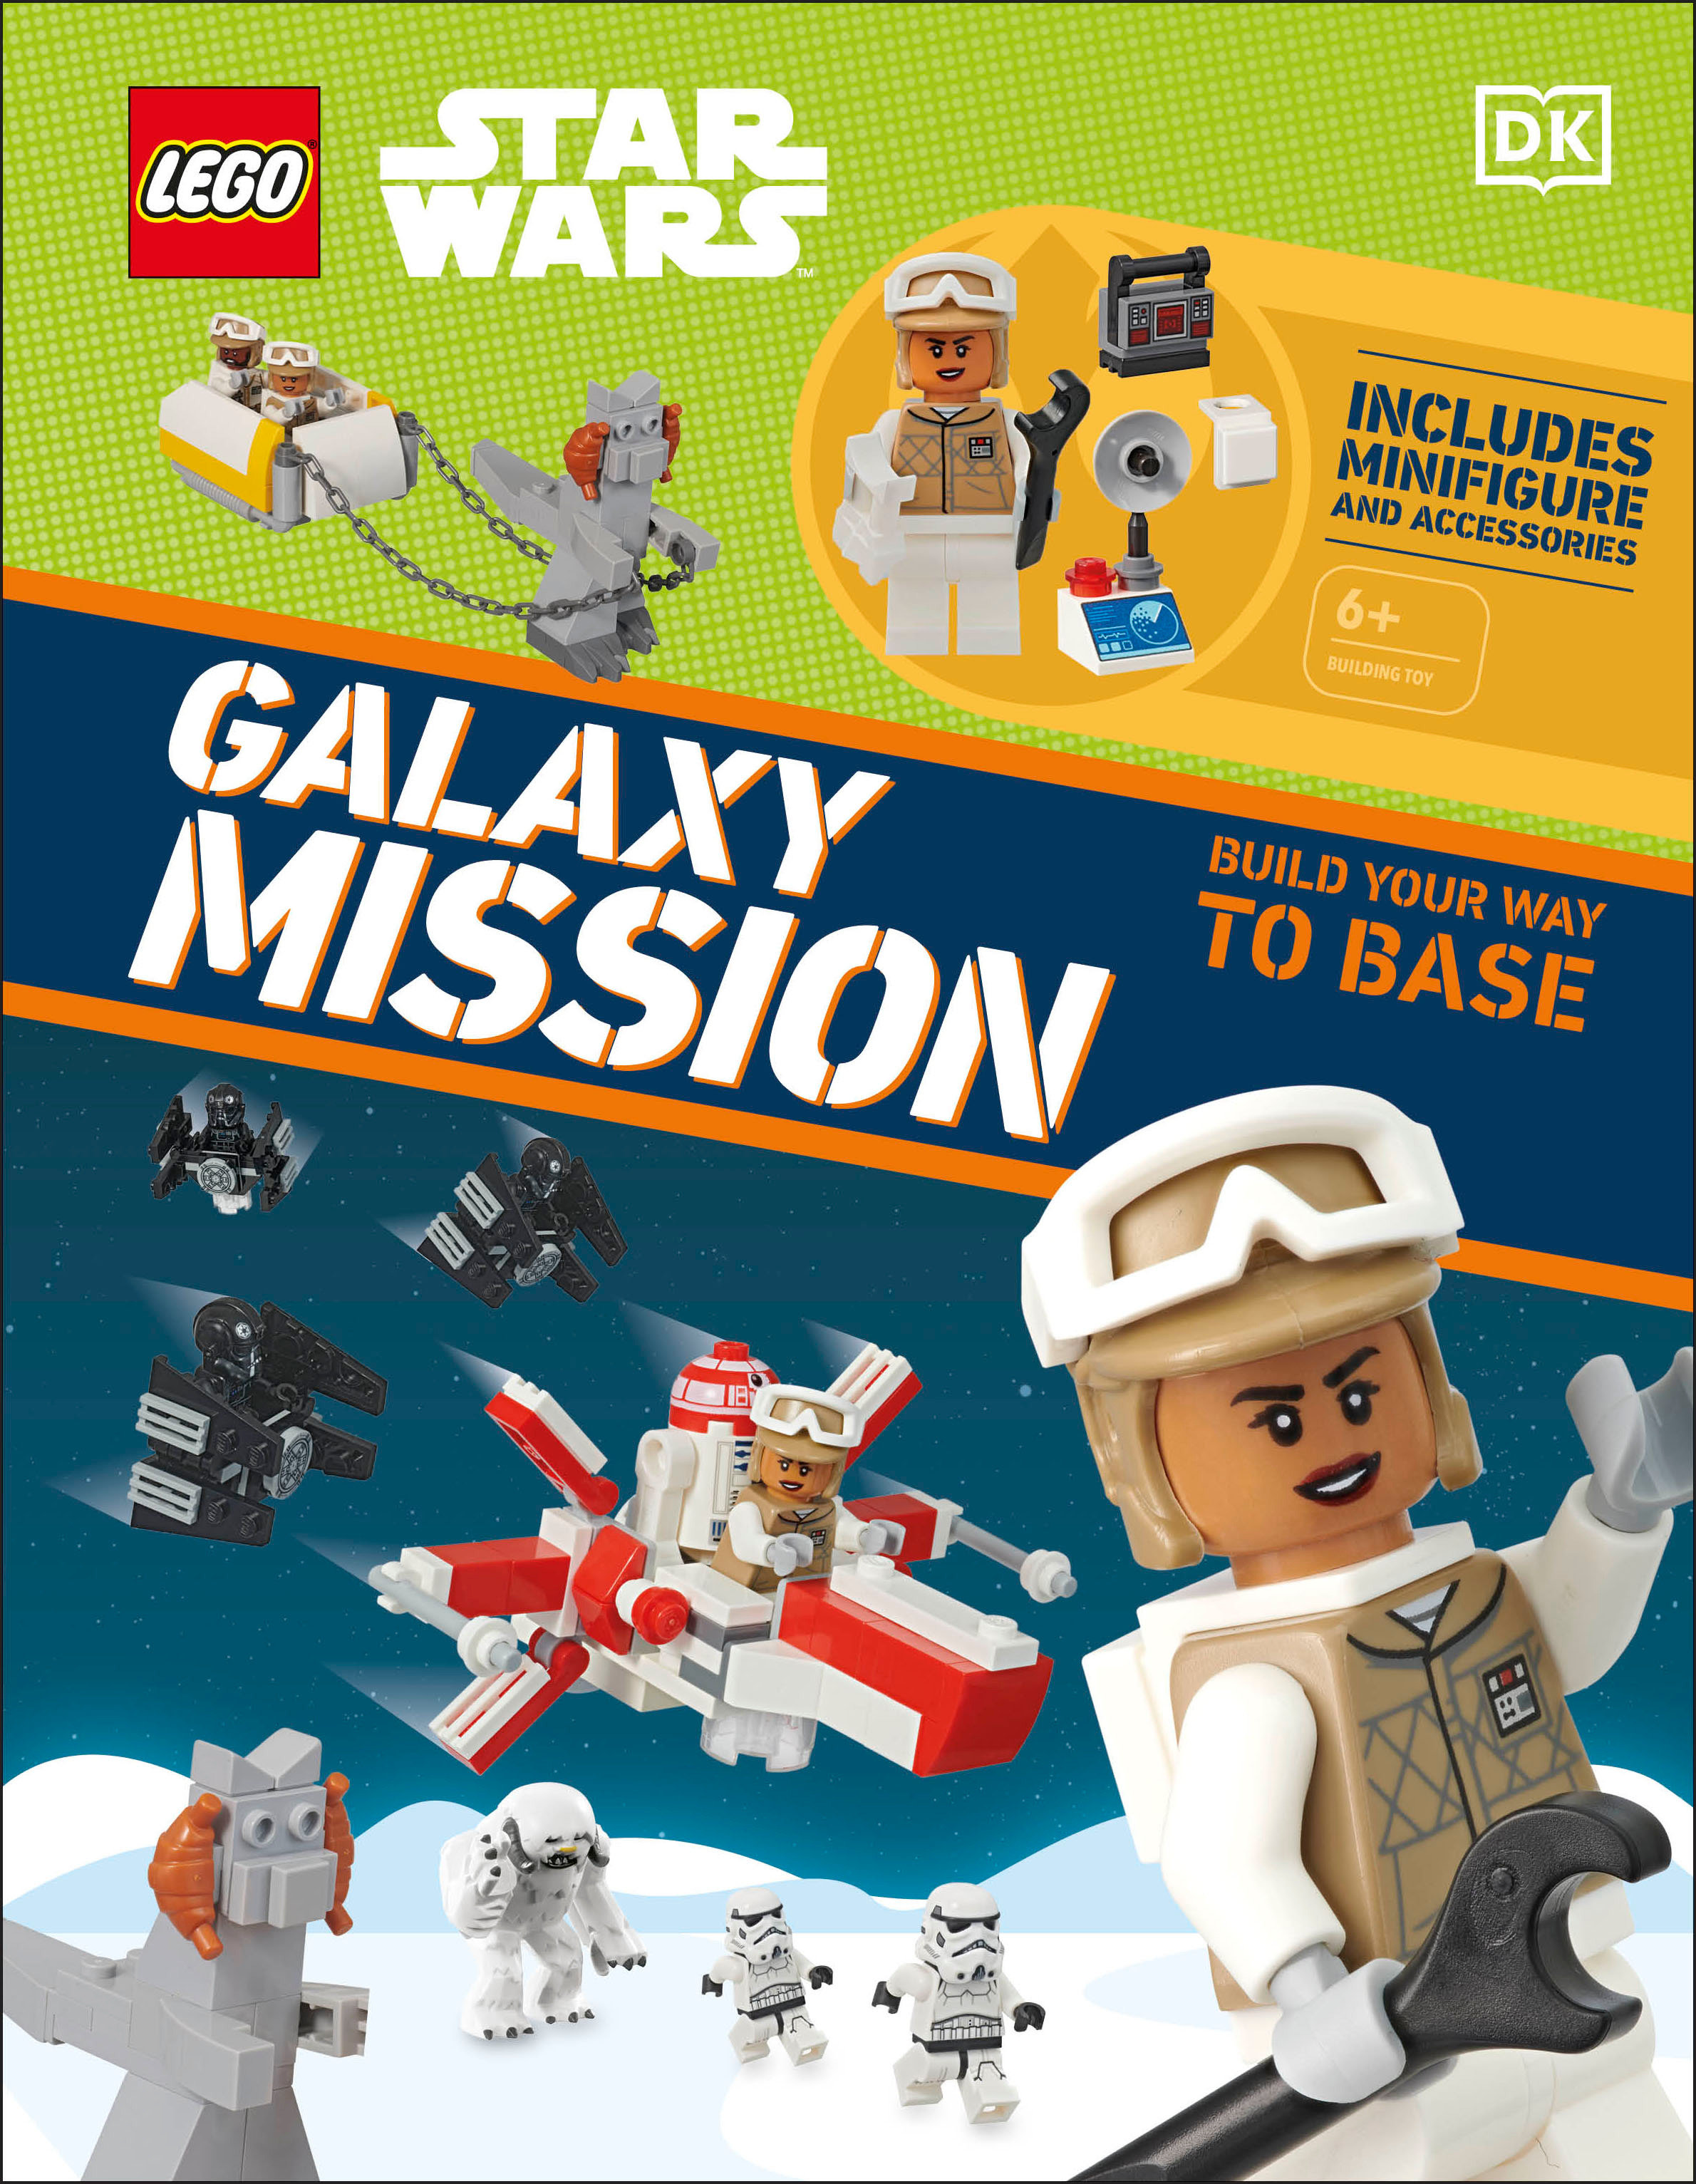 Lego Star Wars Galaxy Mission Softcover